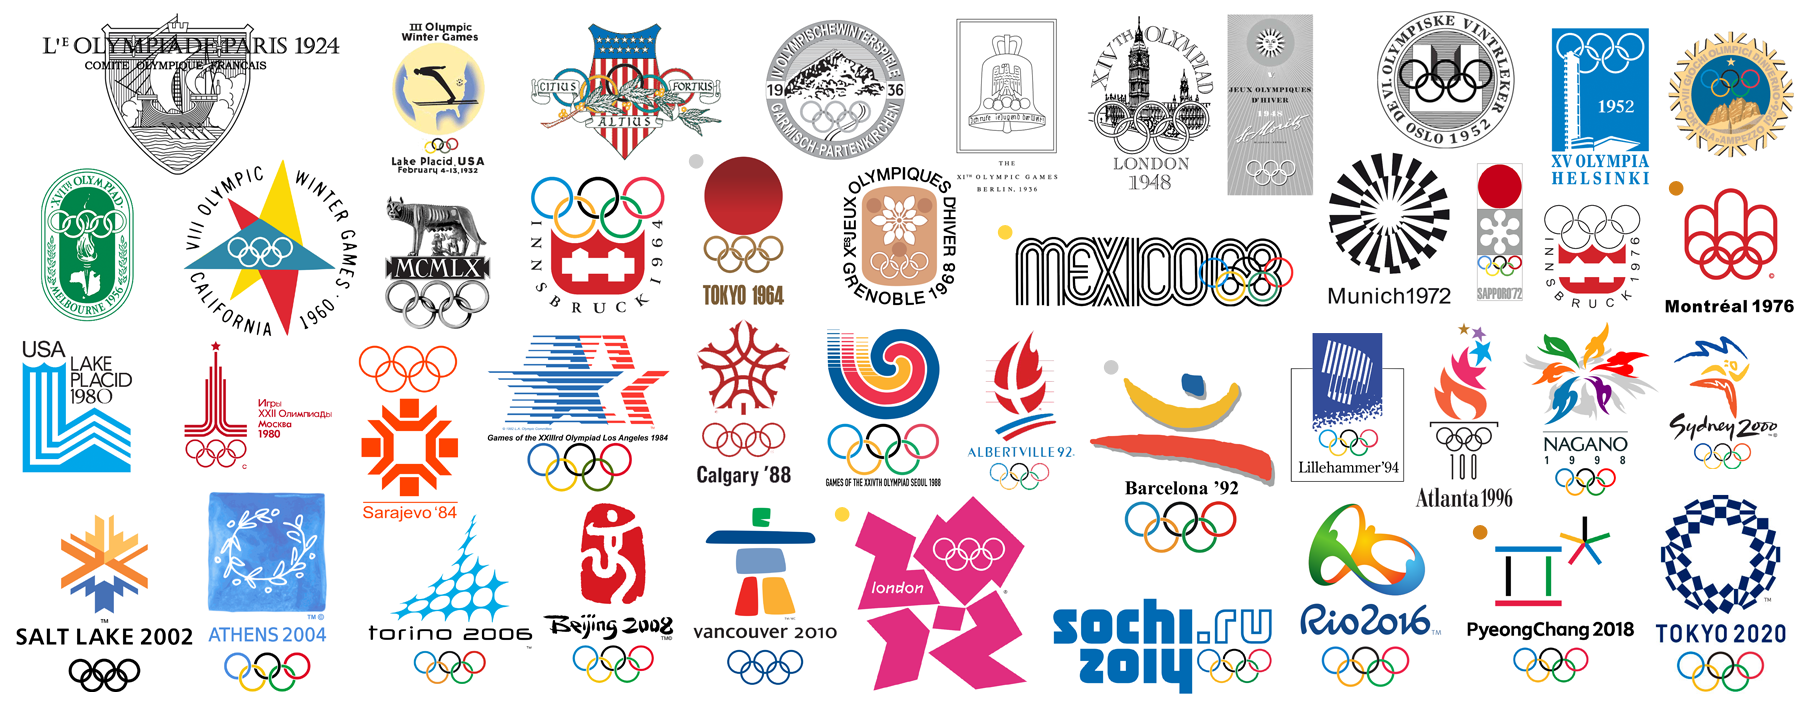 The story behind the Olympic symbol